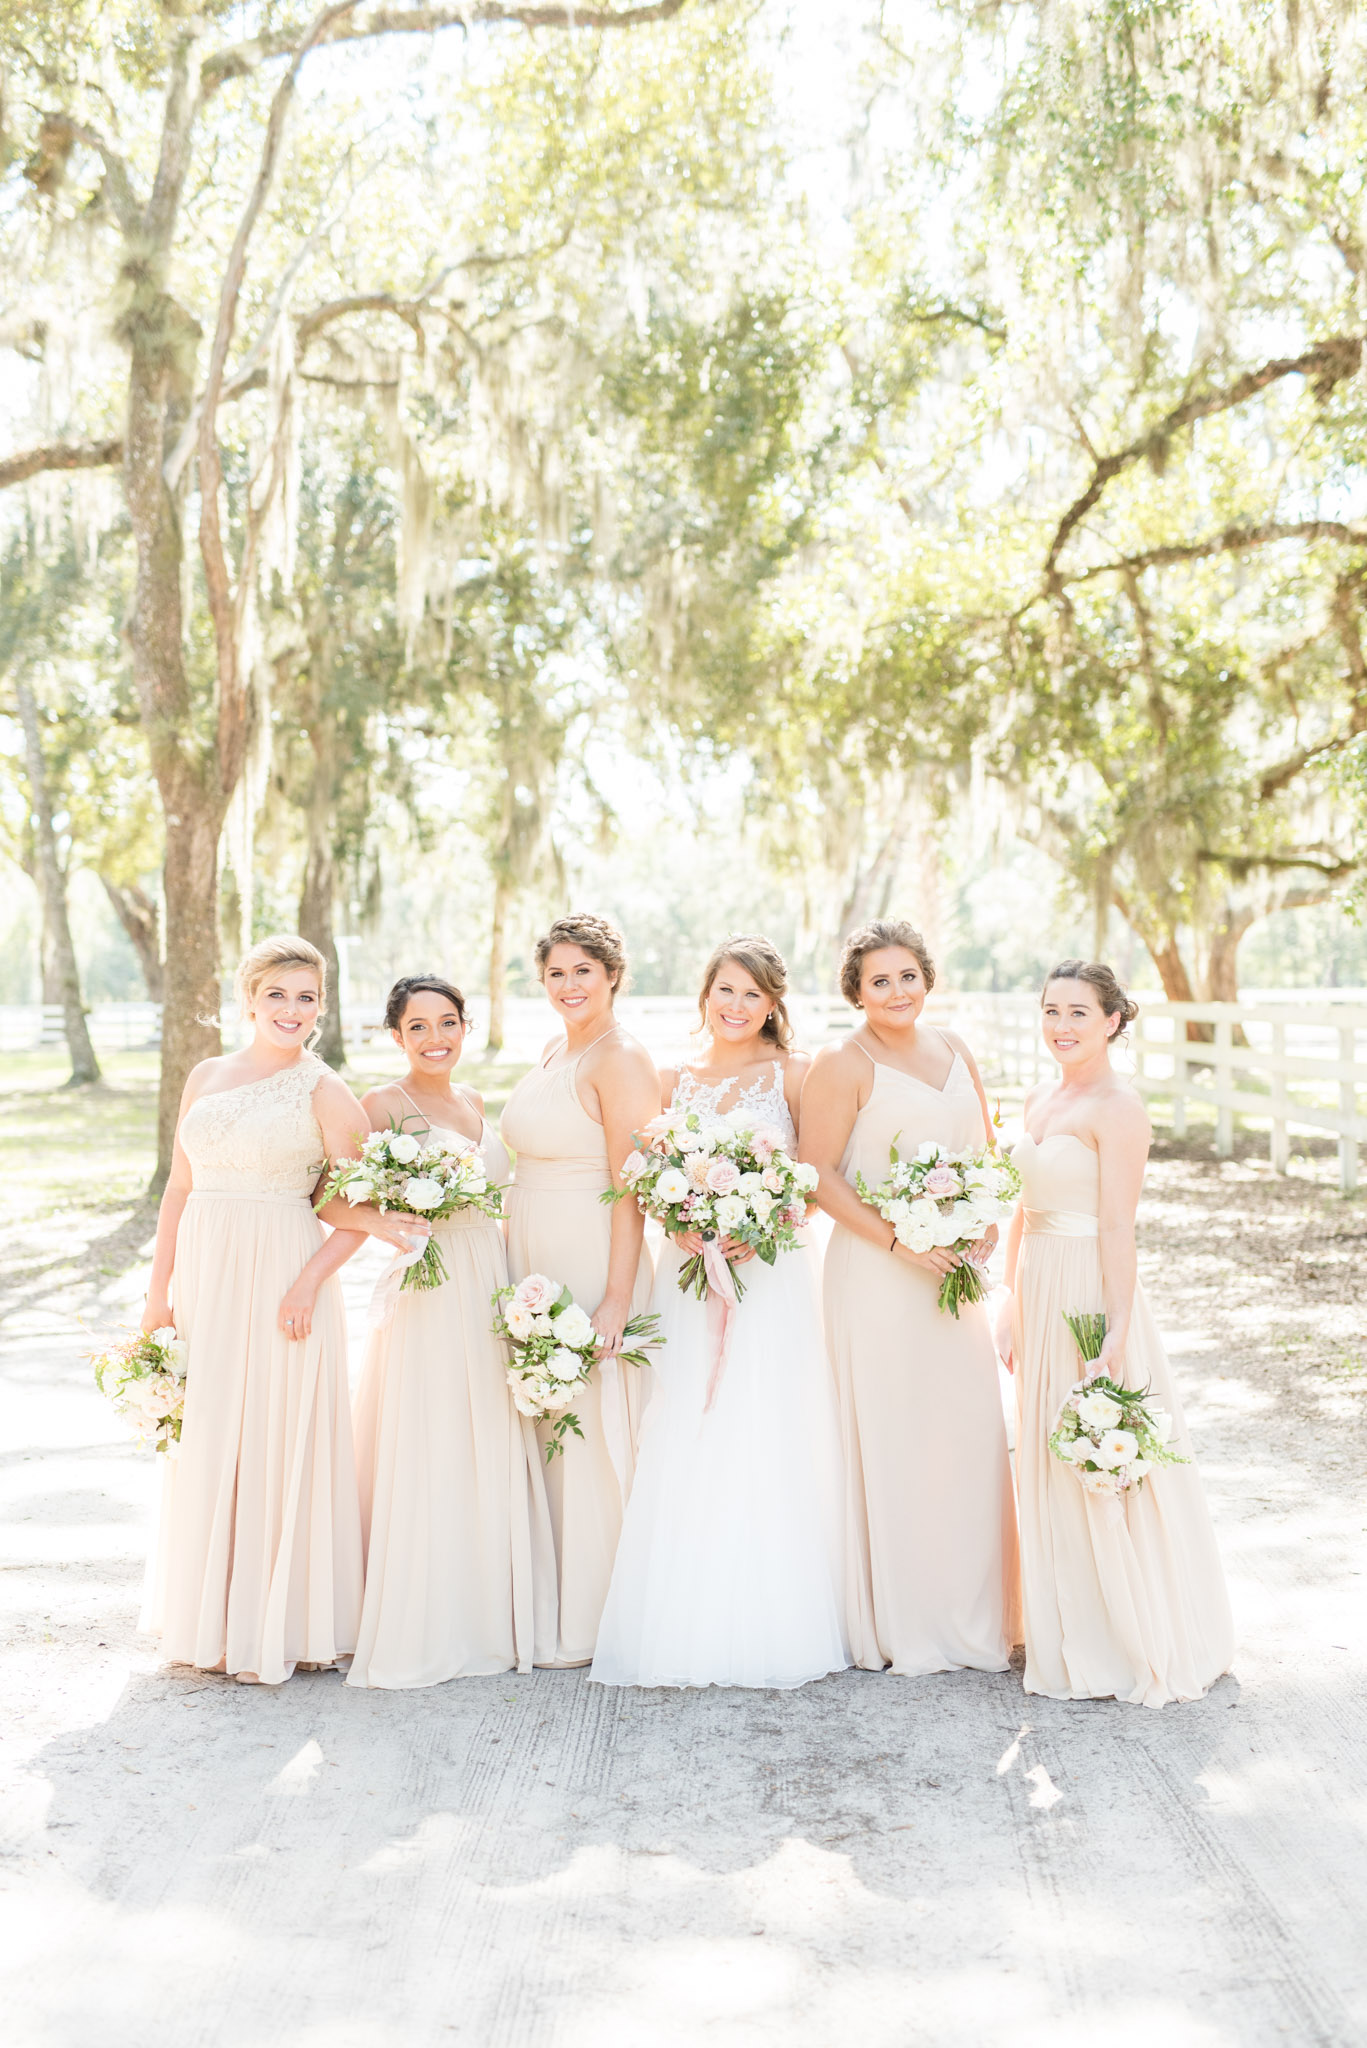 Bridal party smiles at camera with oaks in background.